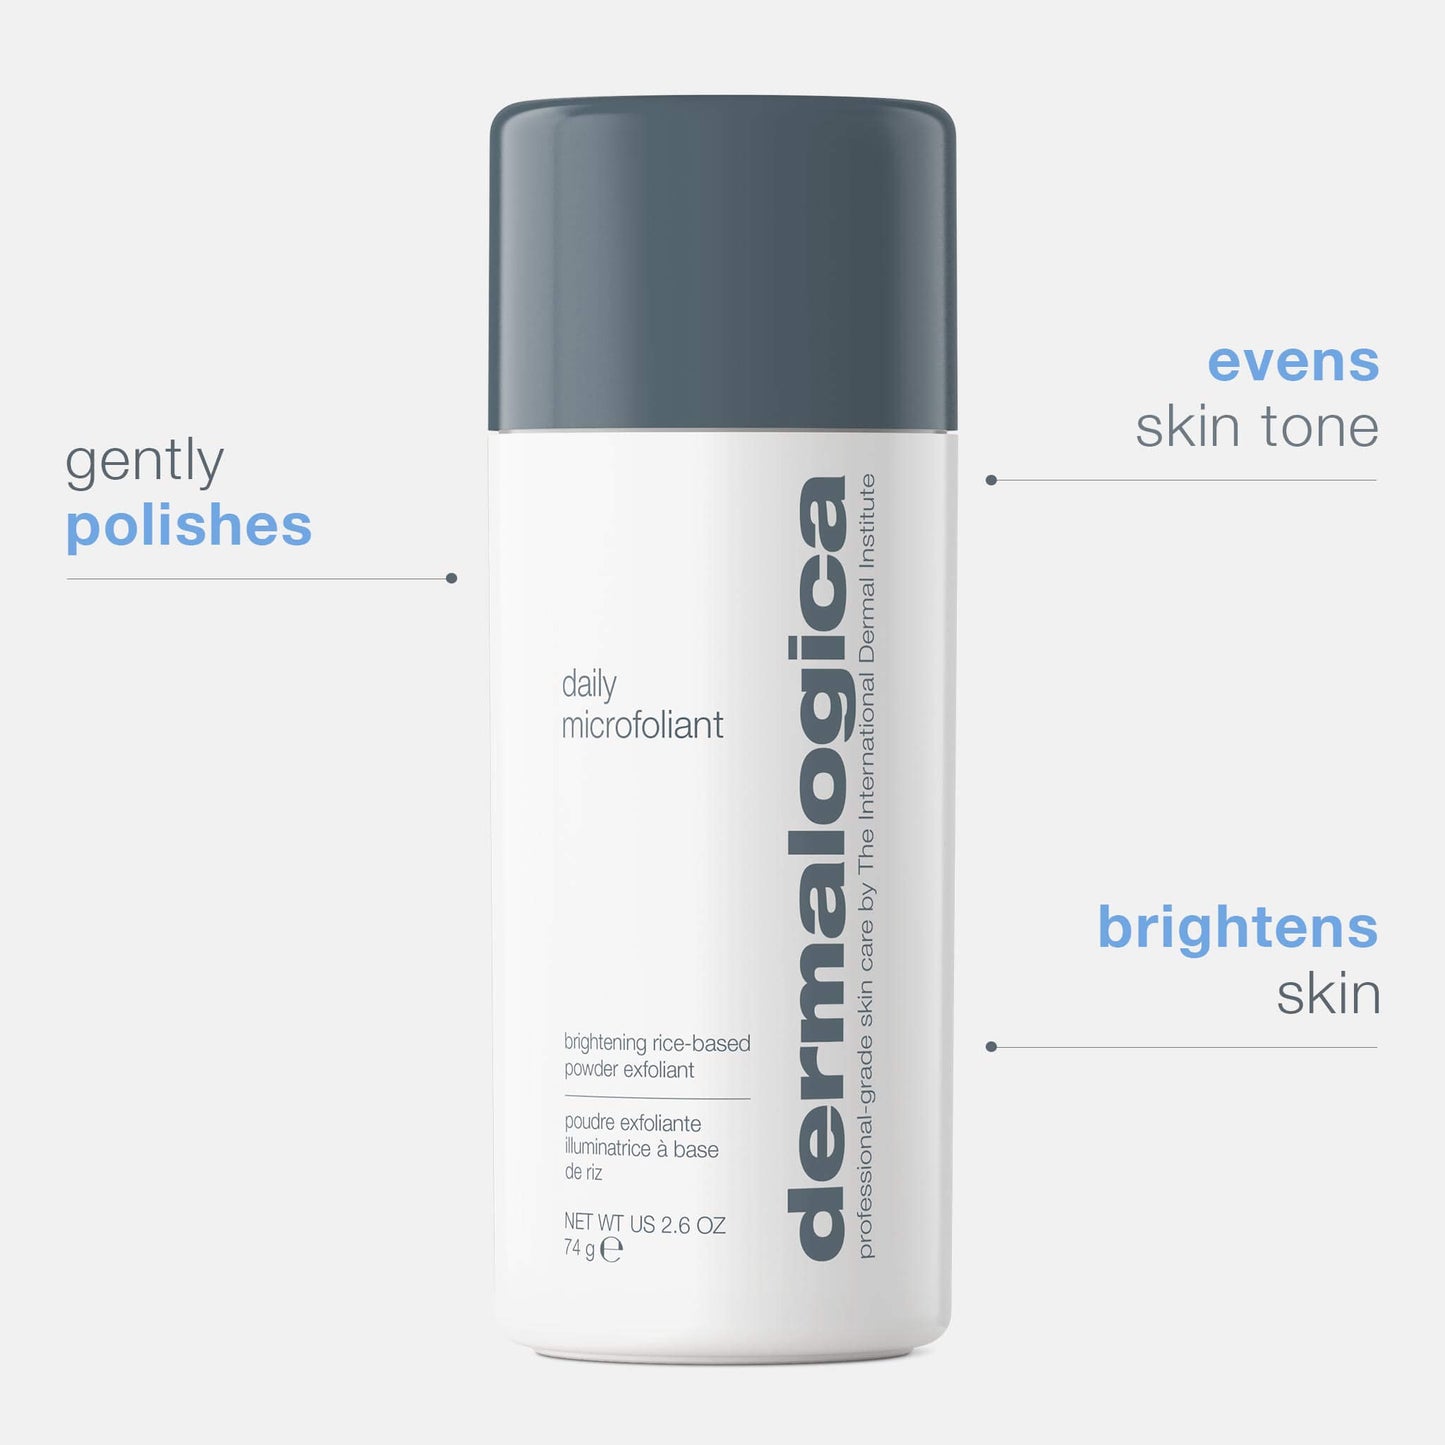 Daily Microfoliant benefits. Gently polishes, evens skin tone, brightens skin.